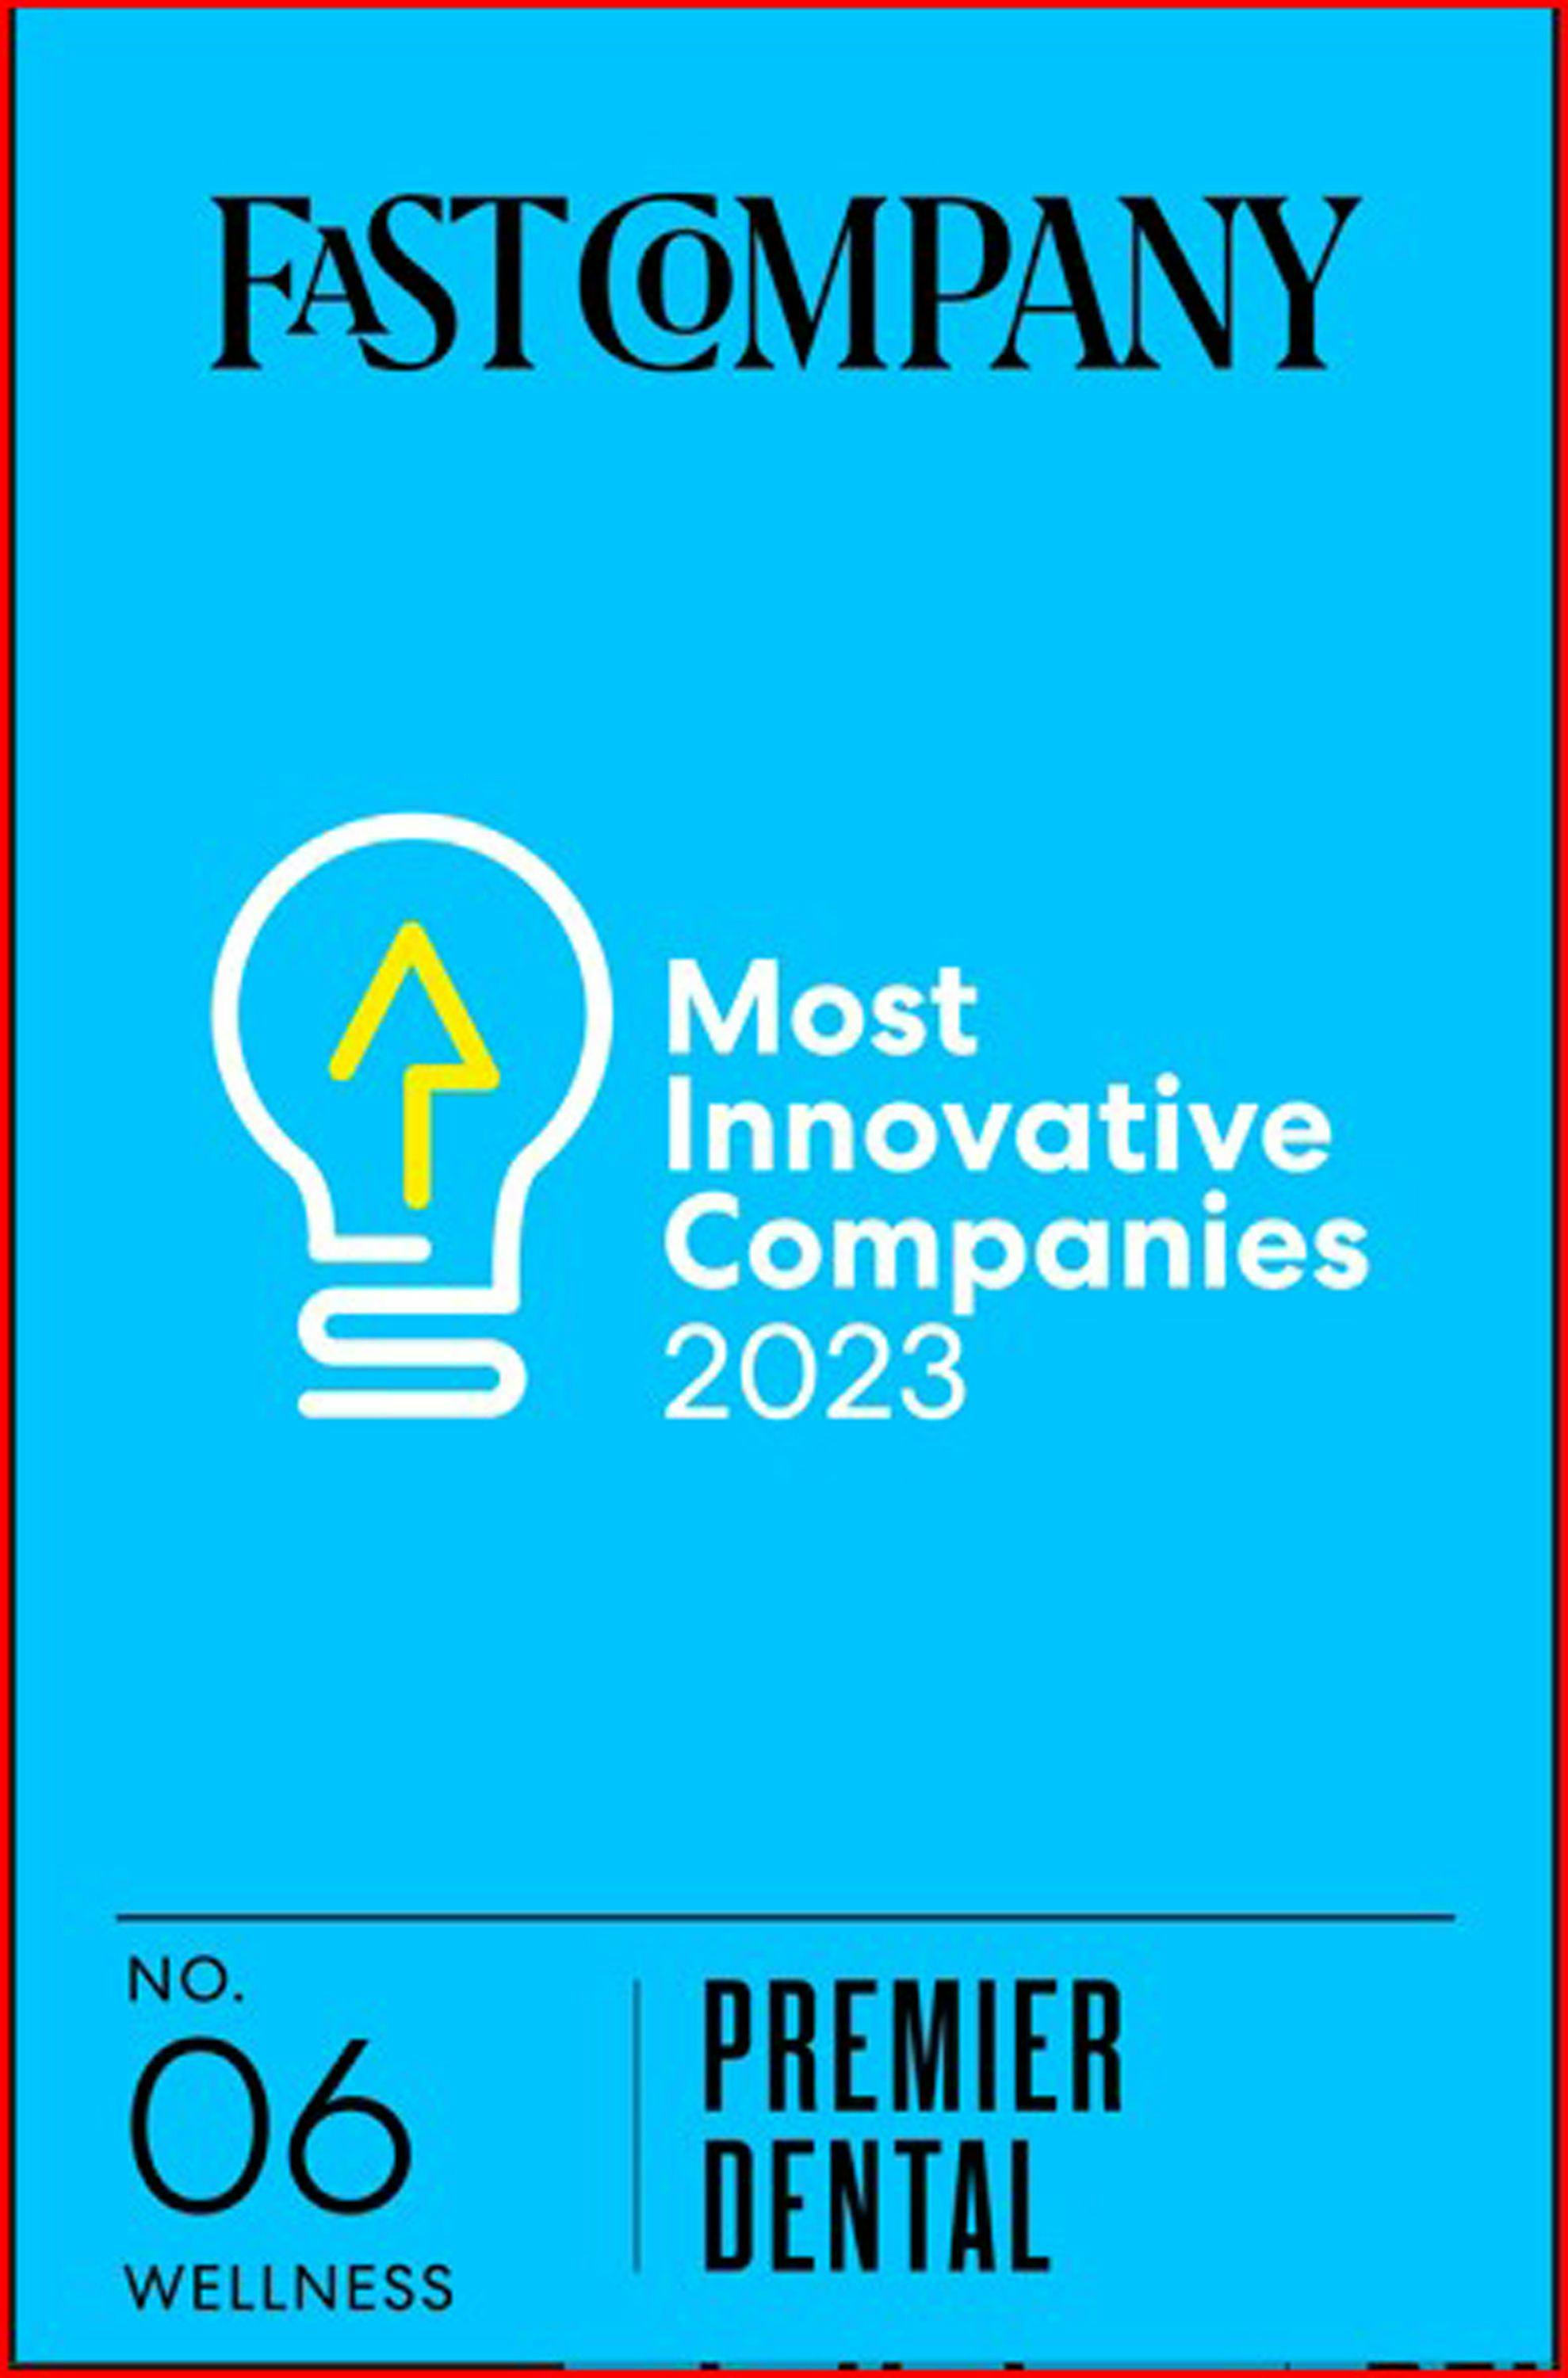 Premier Dental Named to Fast Company’s 2023 List of World’s Most Innovative Companies